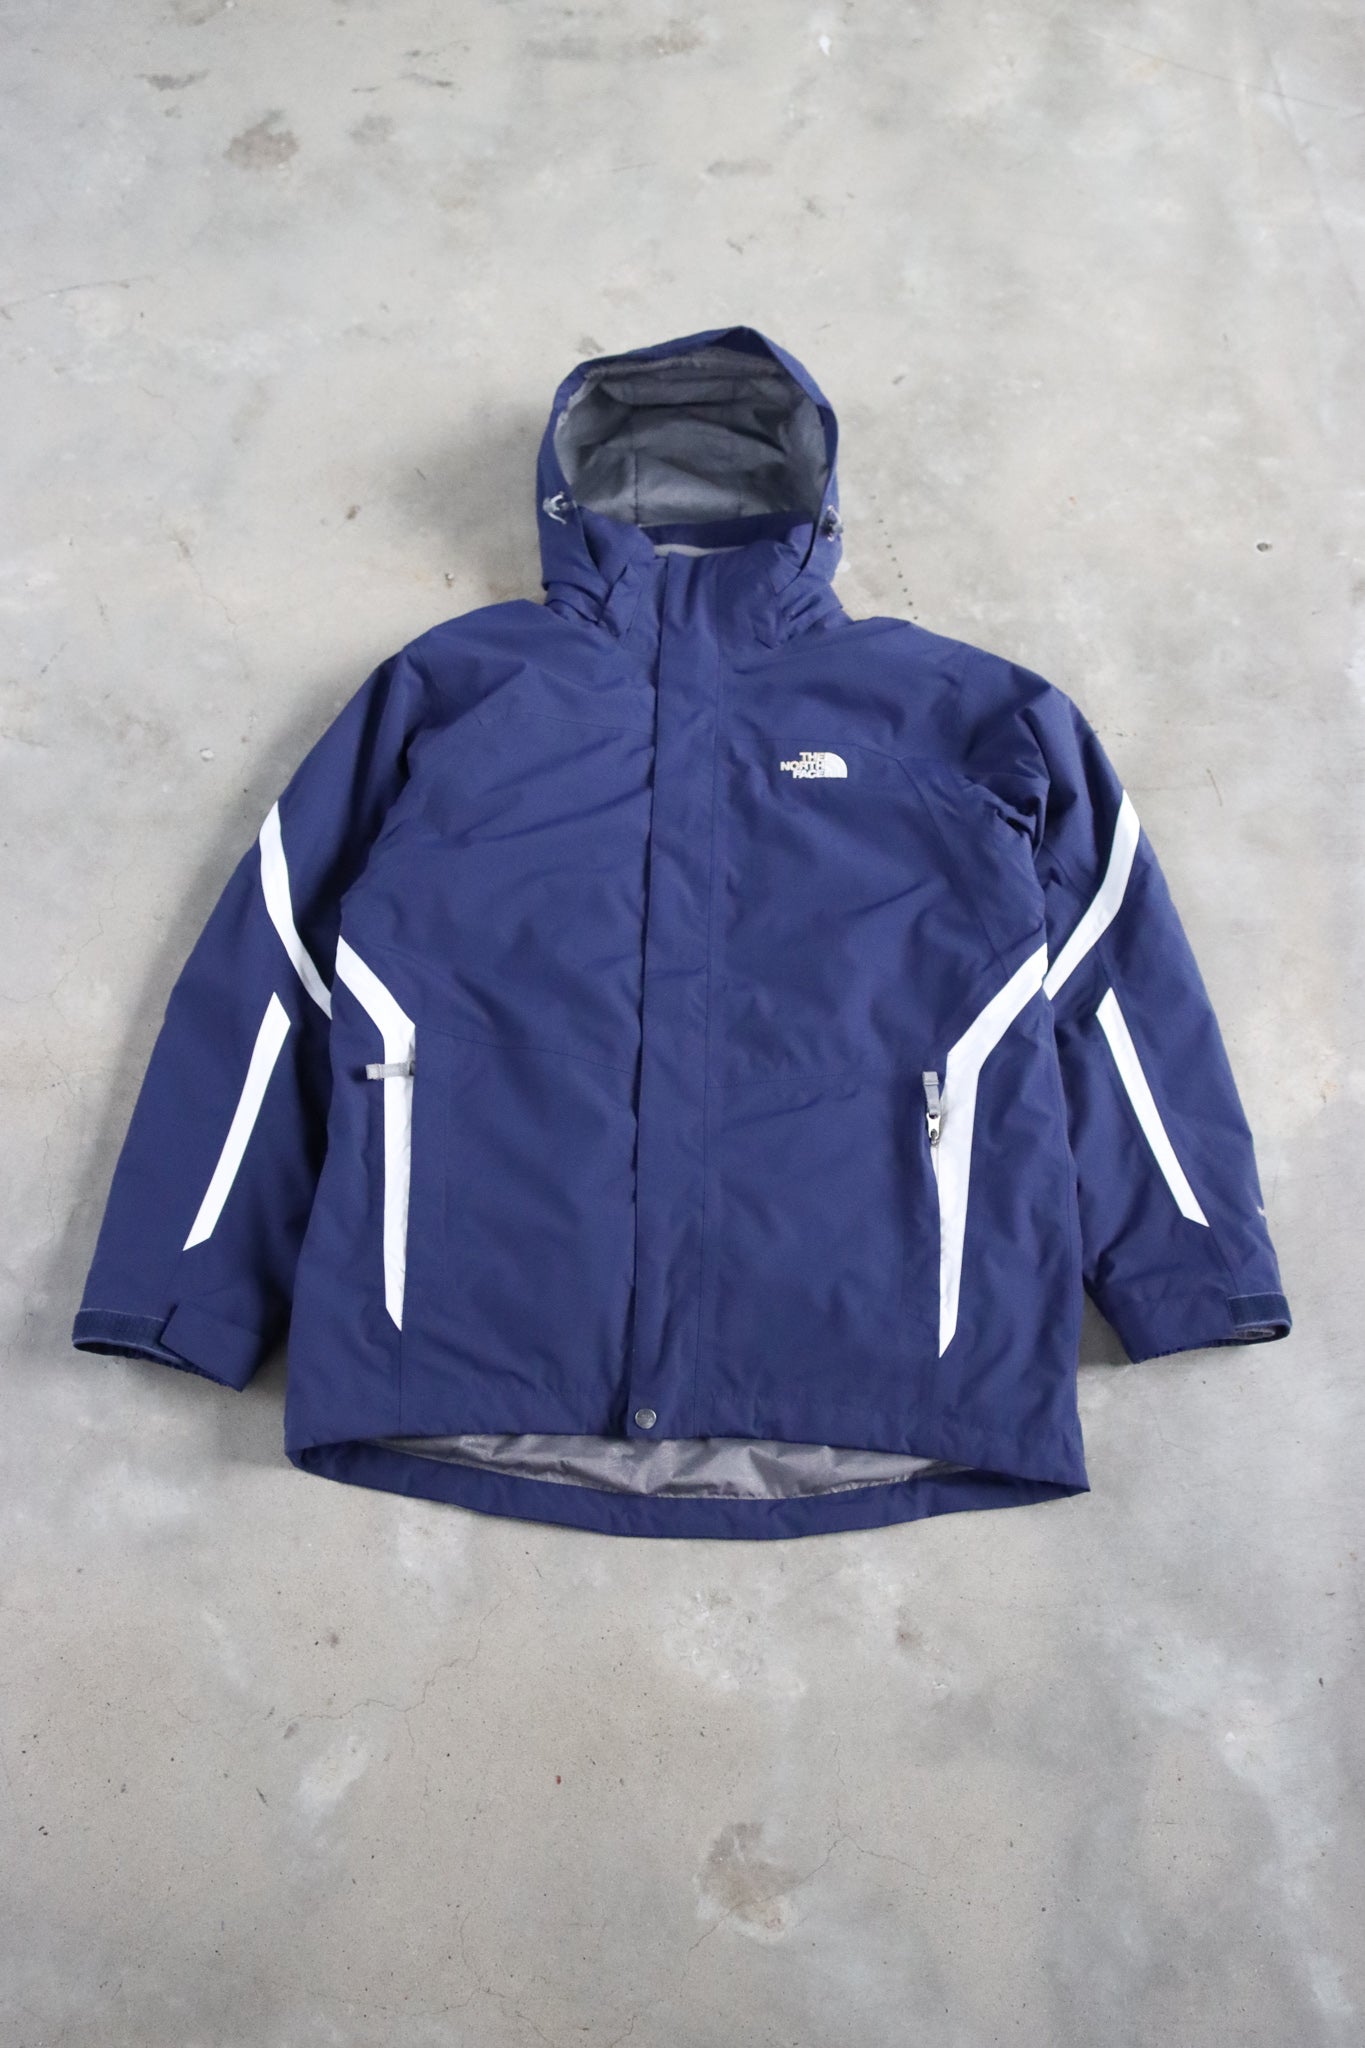 Vintage The North Face Hyvent Series 2 in 1 Jacket XL